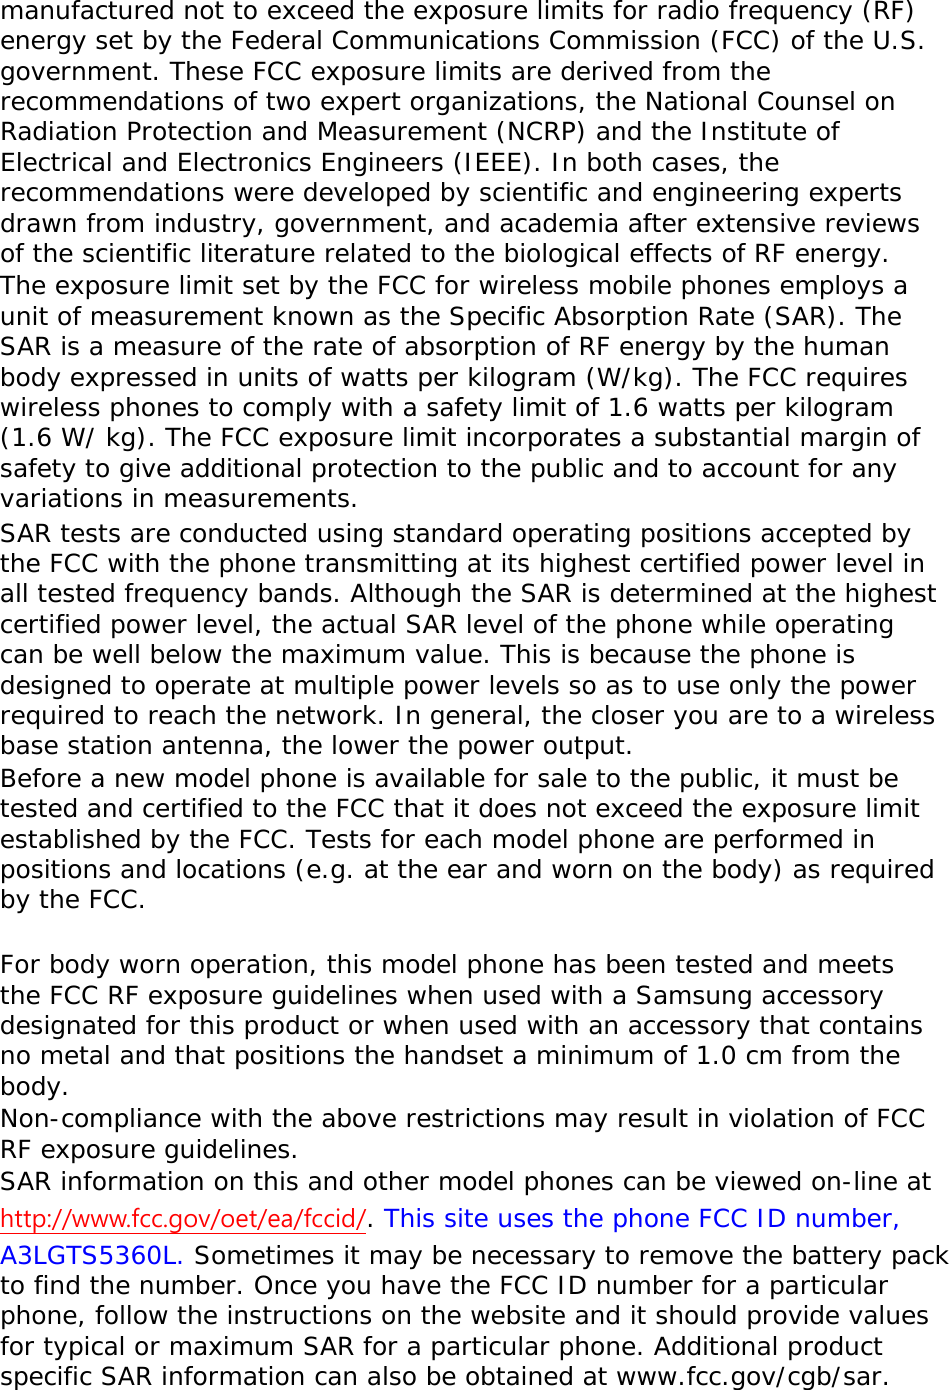 manufactured not to exceed the exposure limits for radio frequency (RF) energy set by the Federal Communications Commission (FCC) of the U.S. government. These FCC exposure limits are derived from the recommendations of two expert organizations, the National Counsel on Radiation Protection and Measurement (NCRP) and the Institute of Electrical and Electronics Engineers (IEEE). In both cases, the recommendations were developed by scientific and engineering experts drawn from industry, government, and academia after extensive reviews of the scientific literature related to the biological effects of RF energy. The exposure limit set by the FCC for wireless mobile phones employs a unit of measurement known as the Specific Absorption Rate (SAR). The SAR is a measure of the rate of absorption of RF energy by the human body expressed in units of watts per kilogram (W/kg). The FCC requires wireless phones to comply with a safety limit of 1.6 watts per kilogram (1.6 W/ kg). The FCC exposure limit incorporates a substantial margin of safety to give additional protection to the public and to account for any variations in measurements. SAR tests are conducted using standard operating positions accepted by the FCC with the phone transmitting at its highest certified power level in all tested frequency bands. Although the SAR is determined at the highest certified power level, the actual SAR level of the phone while operating can be well below the maximum value. This is because the phone is designed to operate at multiple power levels so as to use only the power required to reach the network. In general, the closer you are to a wireless base station antenna, the lower the power output. Before a new model phone is available for sale to the public, it must be tested and certified to the FCC that it does not exceed the exposure limit established by the FCC. Tests for each model phone are performed in positions and locations (e.g. at the ear and worn on the body) as required by the FCC.    For body worn operation, this model phone has been tested and meets the FCC RF exposure guidelines when used with a Samsung accessory designated for this product or when used with an accessory that contains no metal and that positions the handset a minimum of 1.0 cm from the body.  Non-compliance with the above restrictions may result in violation of FCC RF exposure guidelines. SAR information on this and other model phones can be viewed on-line at http://www.fcc.gov/oet/ea/fccid/. This site uses the phone FCC ID number, A3LGTS5360L. Sometimes it may be necessary to remove the battery pack to find the number. Once you have the FCC ID number for a particular phone, follow the instructions on the website and it should provide values for typical or maximum SAR for a particular phone. Additional product specific SAR information can also be obtained at www.fcc.gov/cgb/sar. 